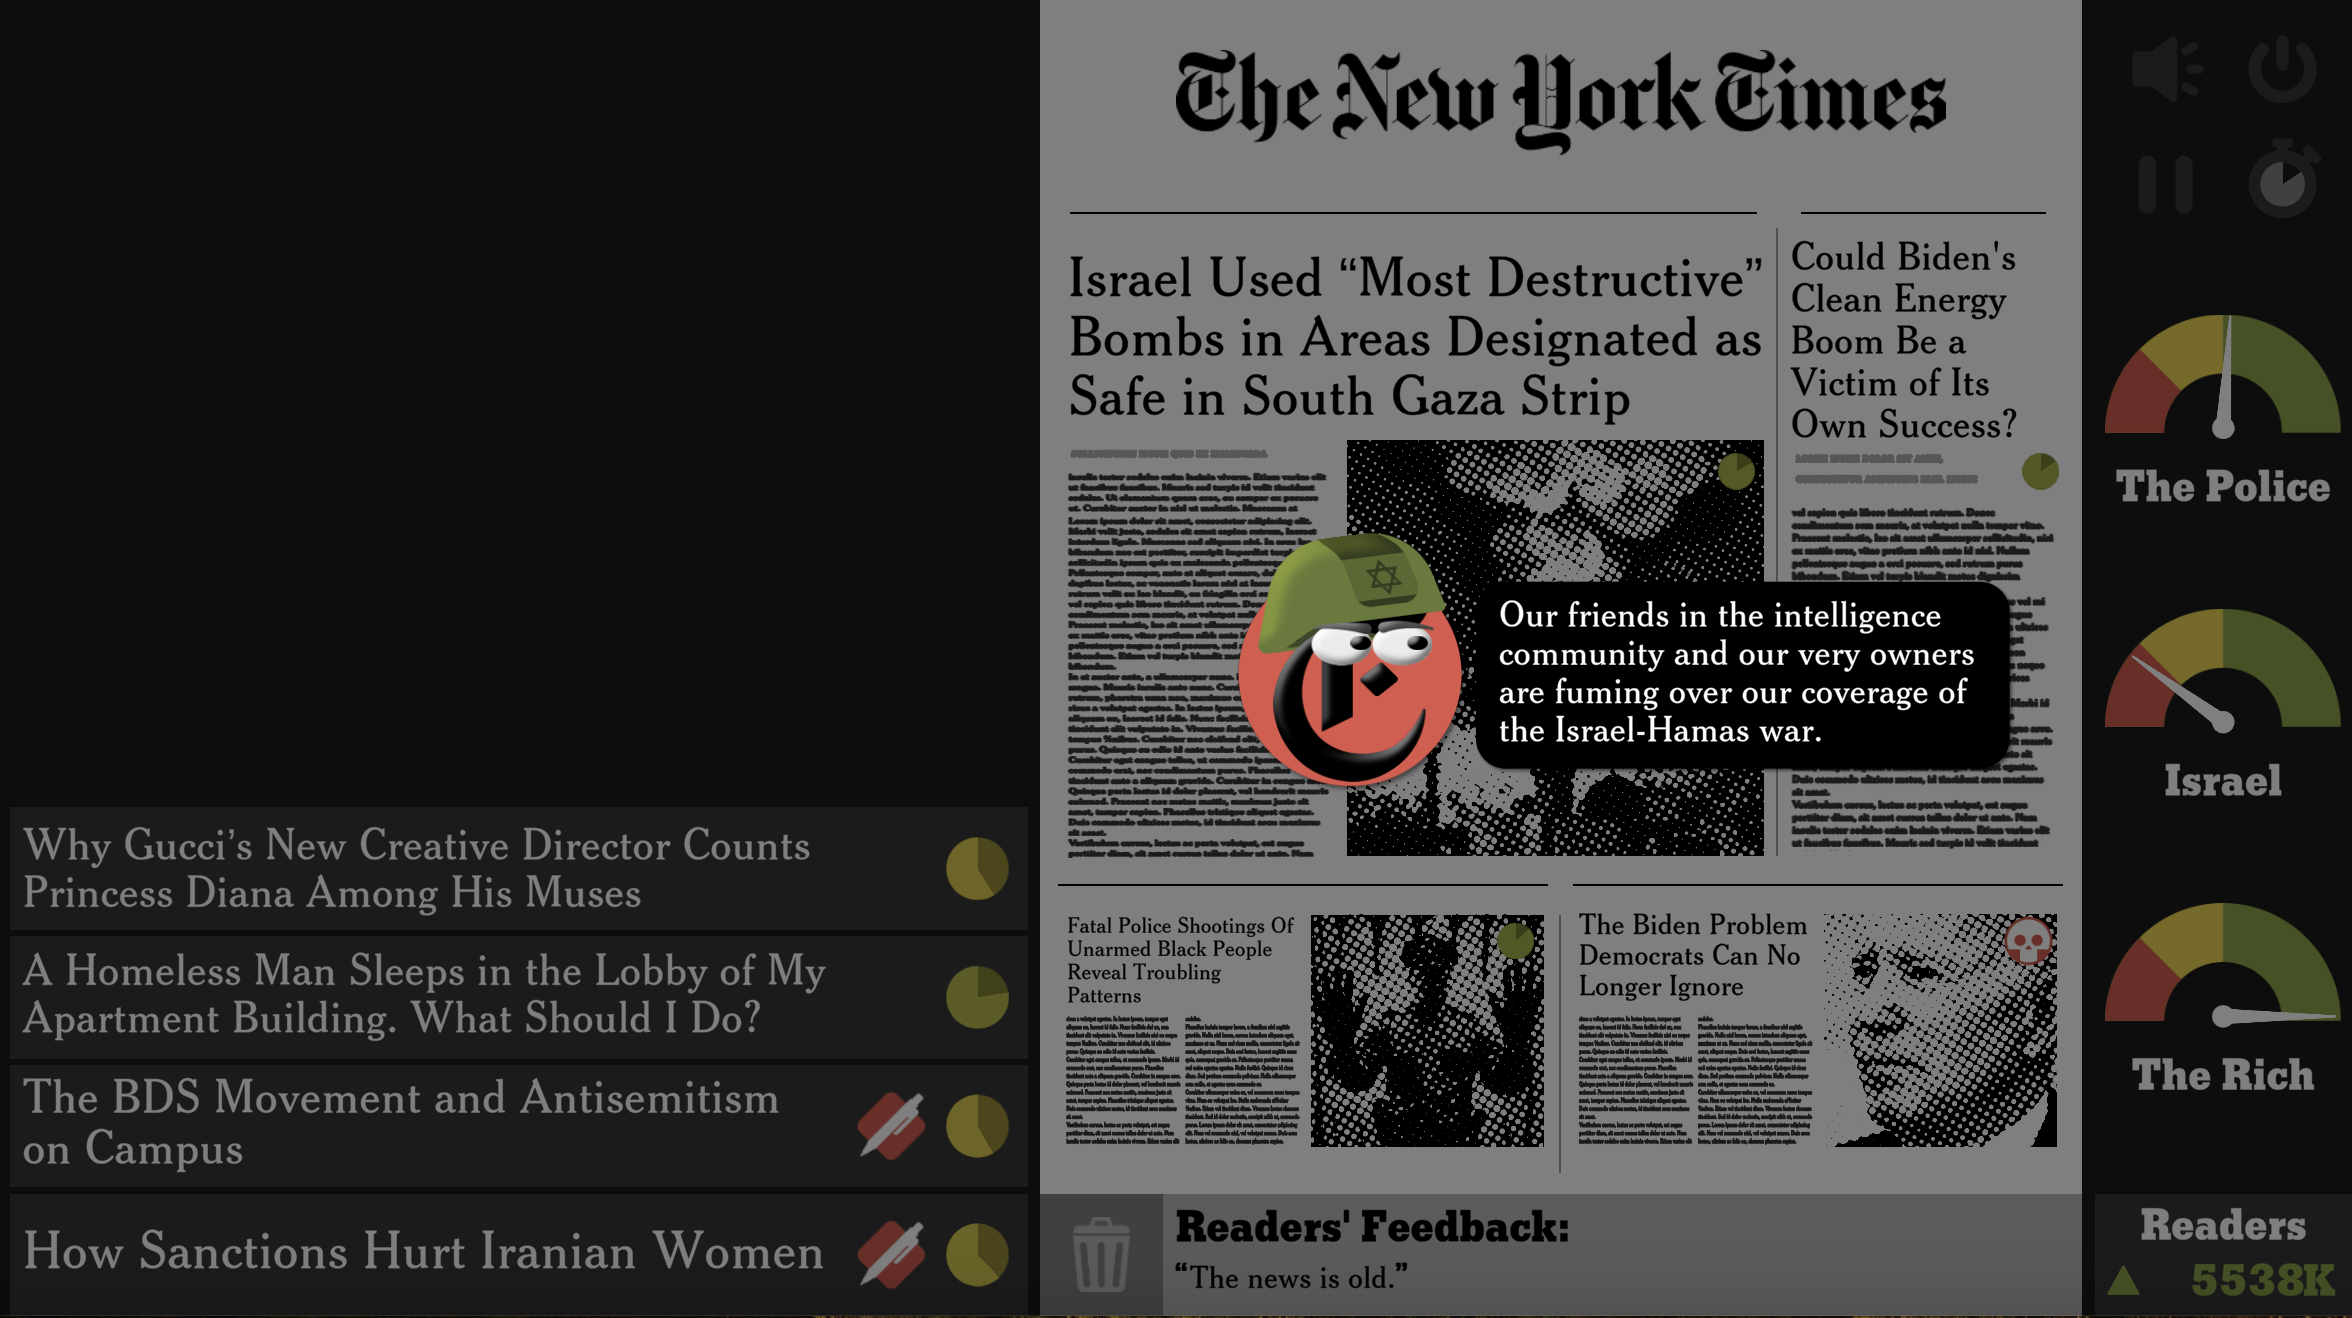 A screenshot from the game "The New York Times Simulator:" a mock newspaper homepage with various headline possibilities to the left. In front, a version of Clippy in a green helmet says "Our friends in the intelligence community and our very owners are fuming over our coverage of the Israel-Hamas war."